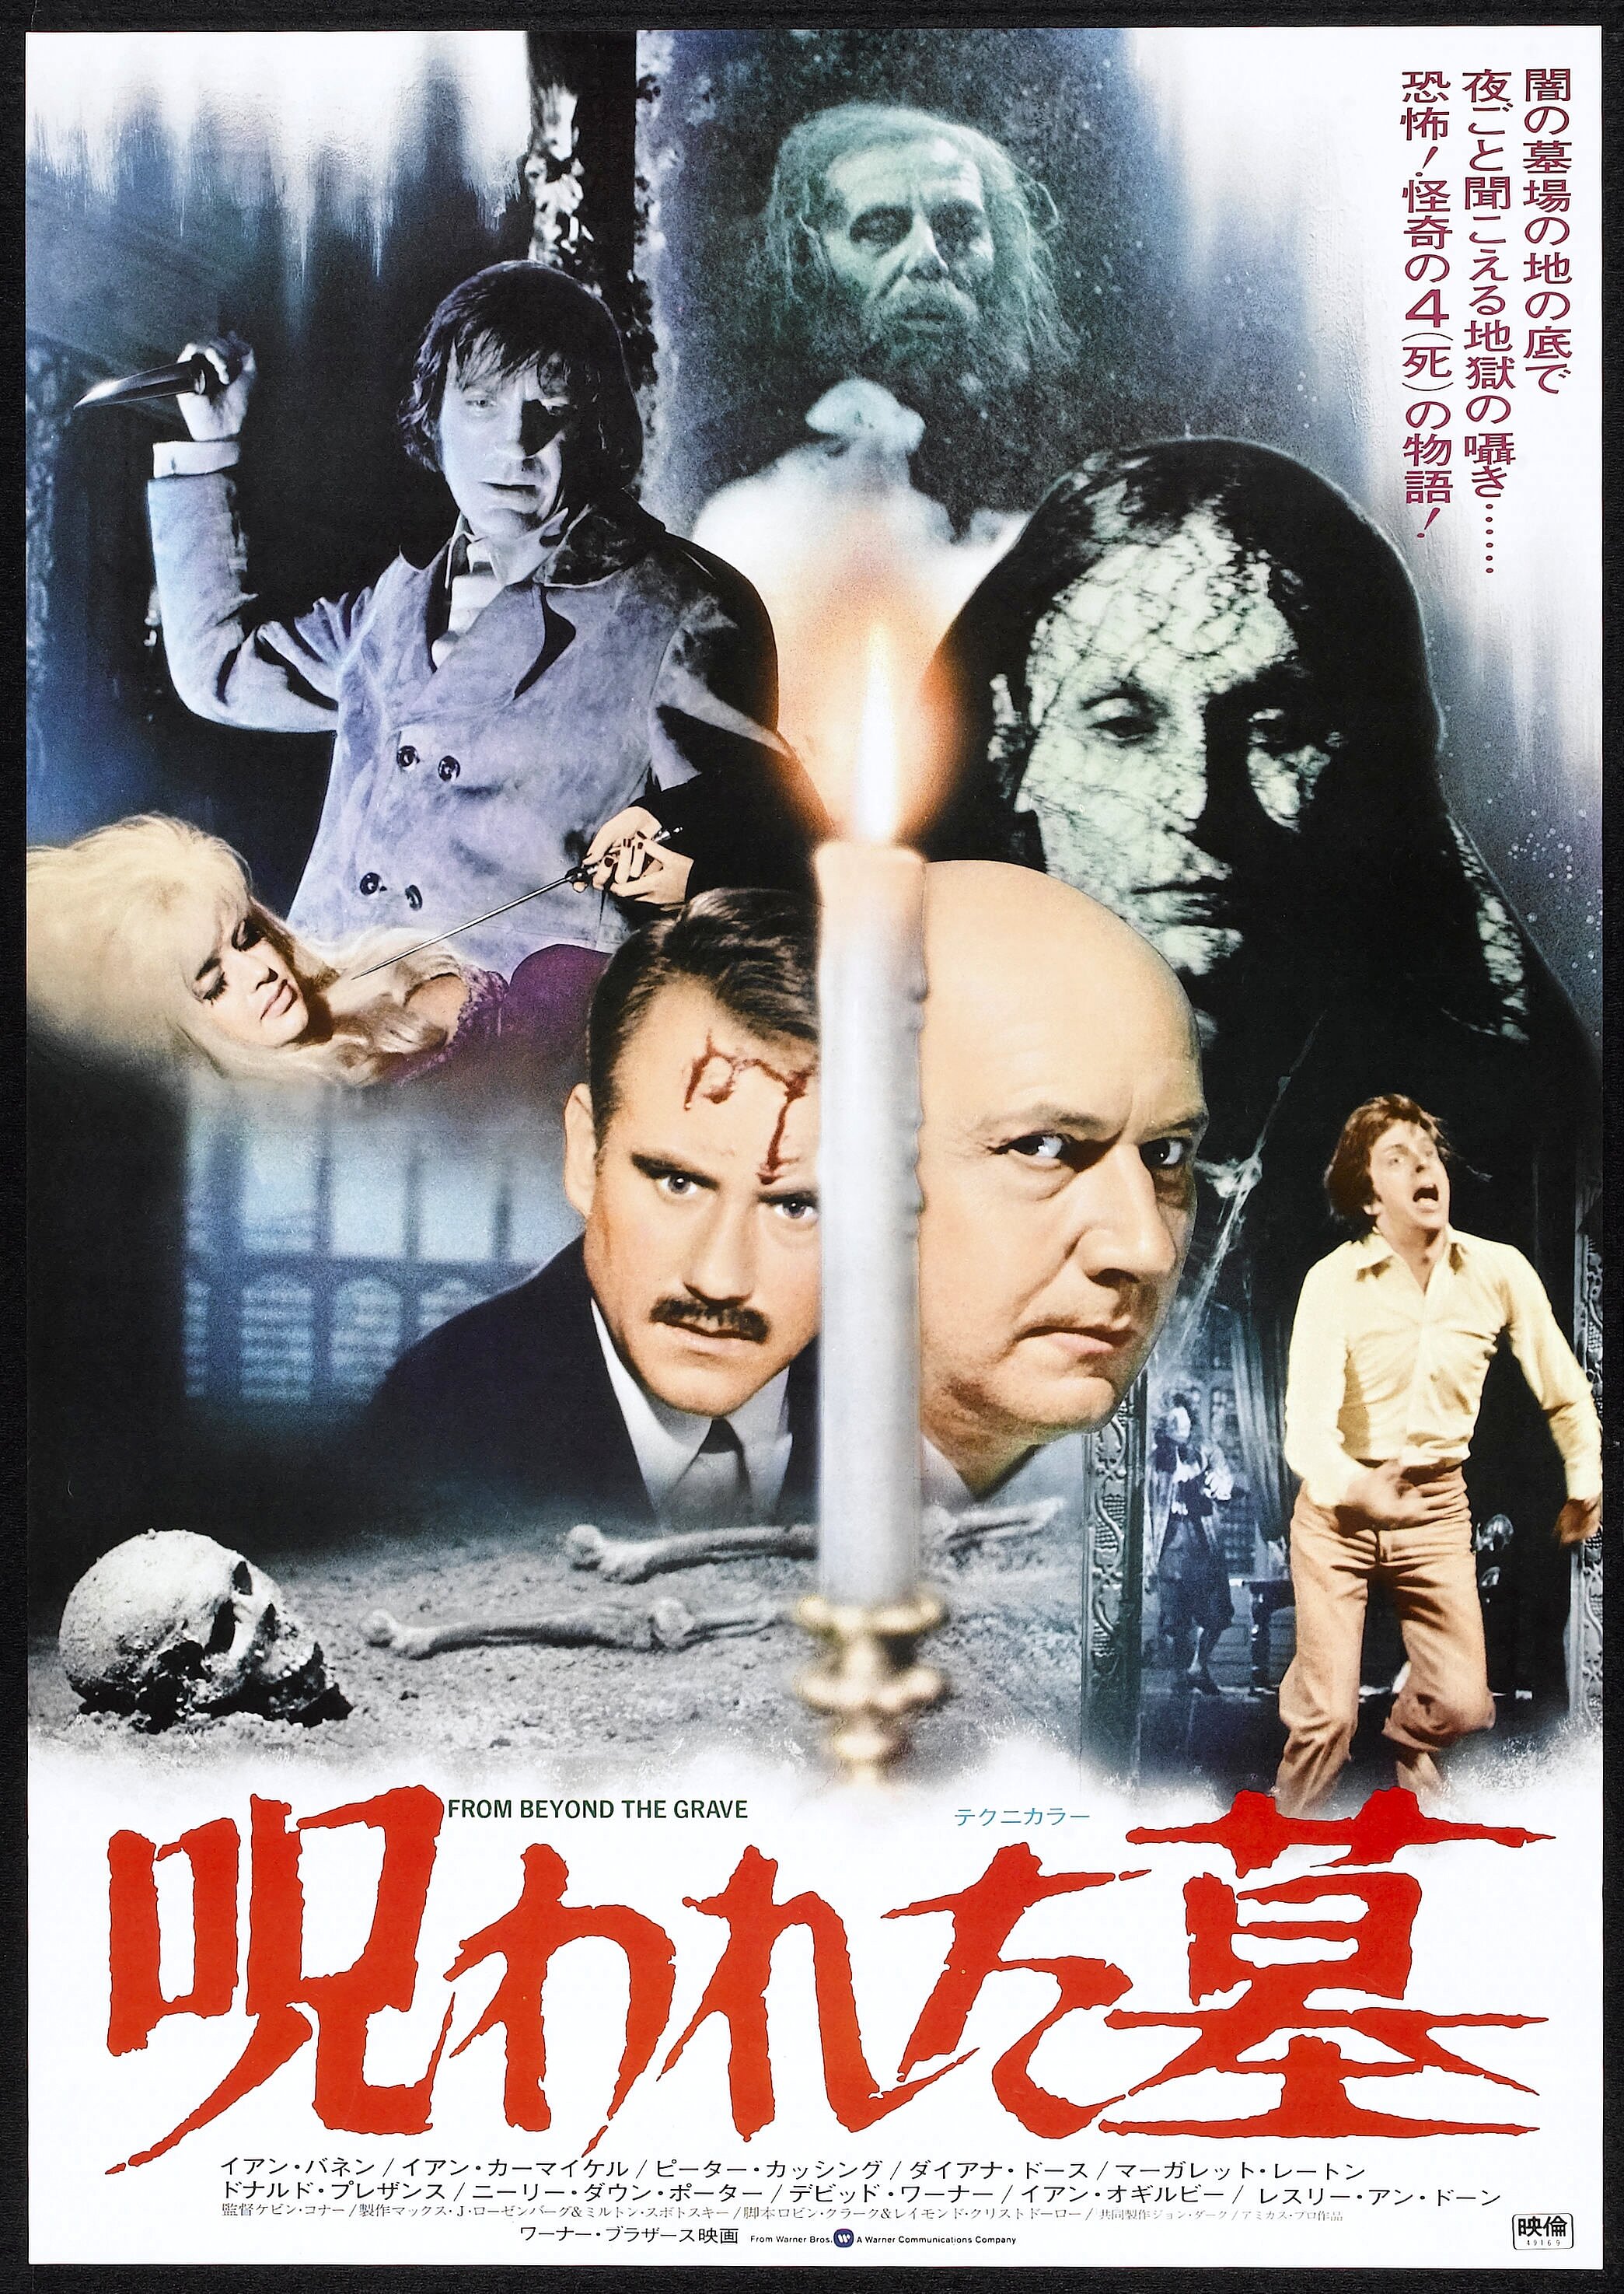 From Beyond The Grave Warner Brothers 1974 Japanese B2 25 Lot Heritage Auctions